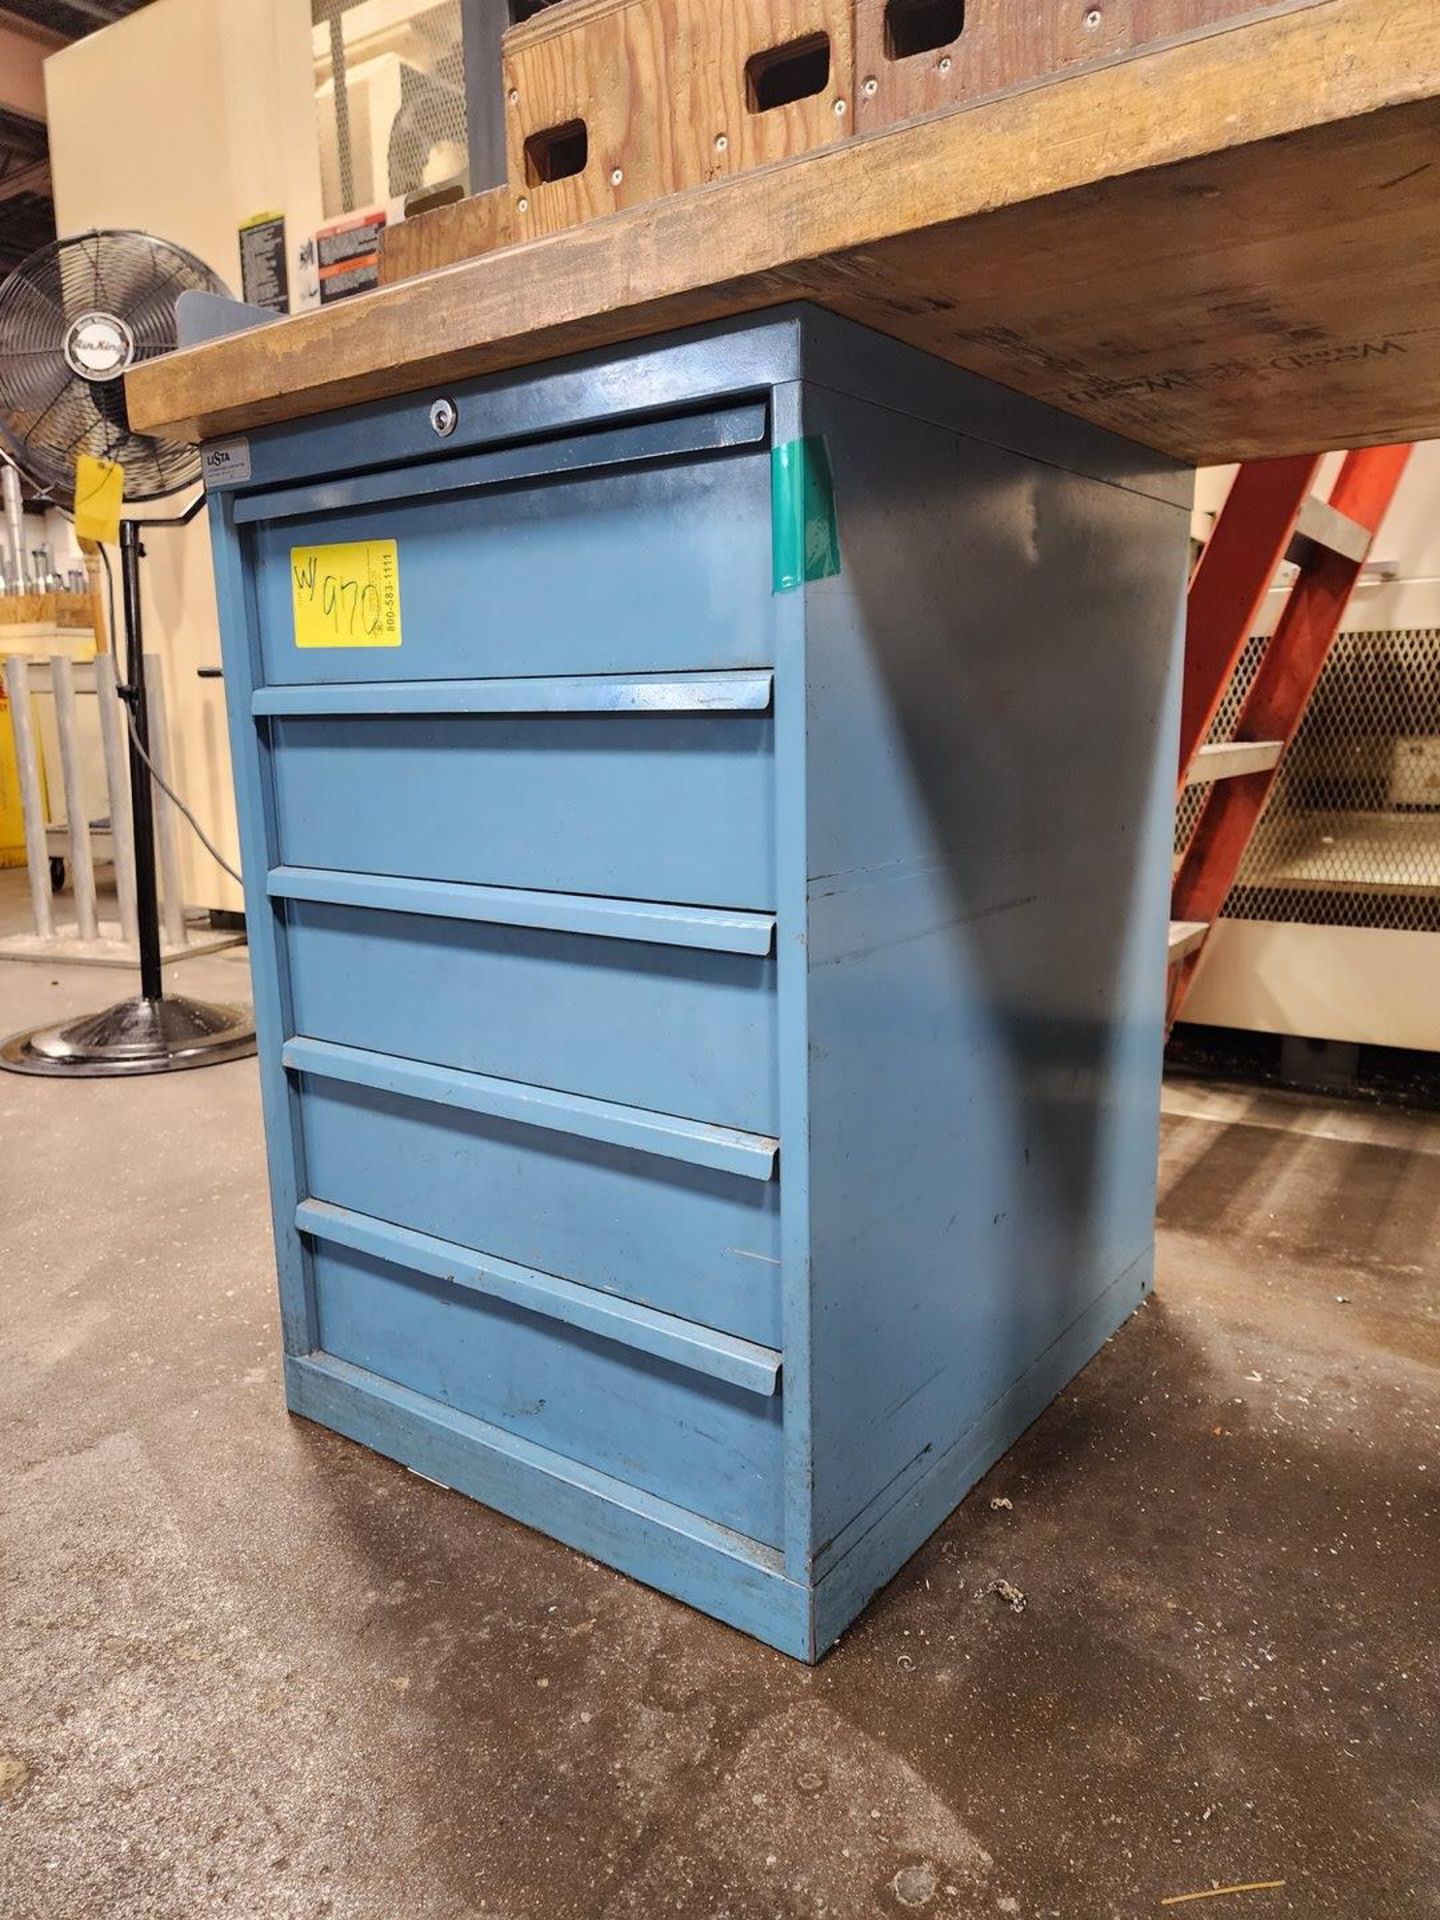 2-Bin Modular Material Cabinet W/ Jig Boring Machine Contents & Other Assorted Contents - Image 14 of 20